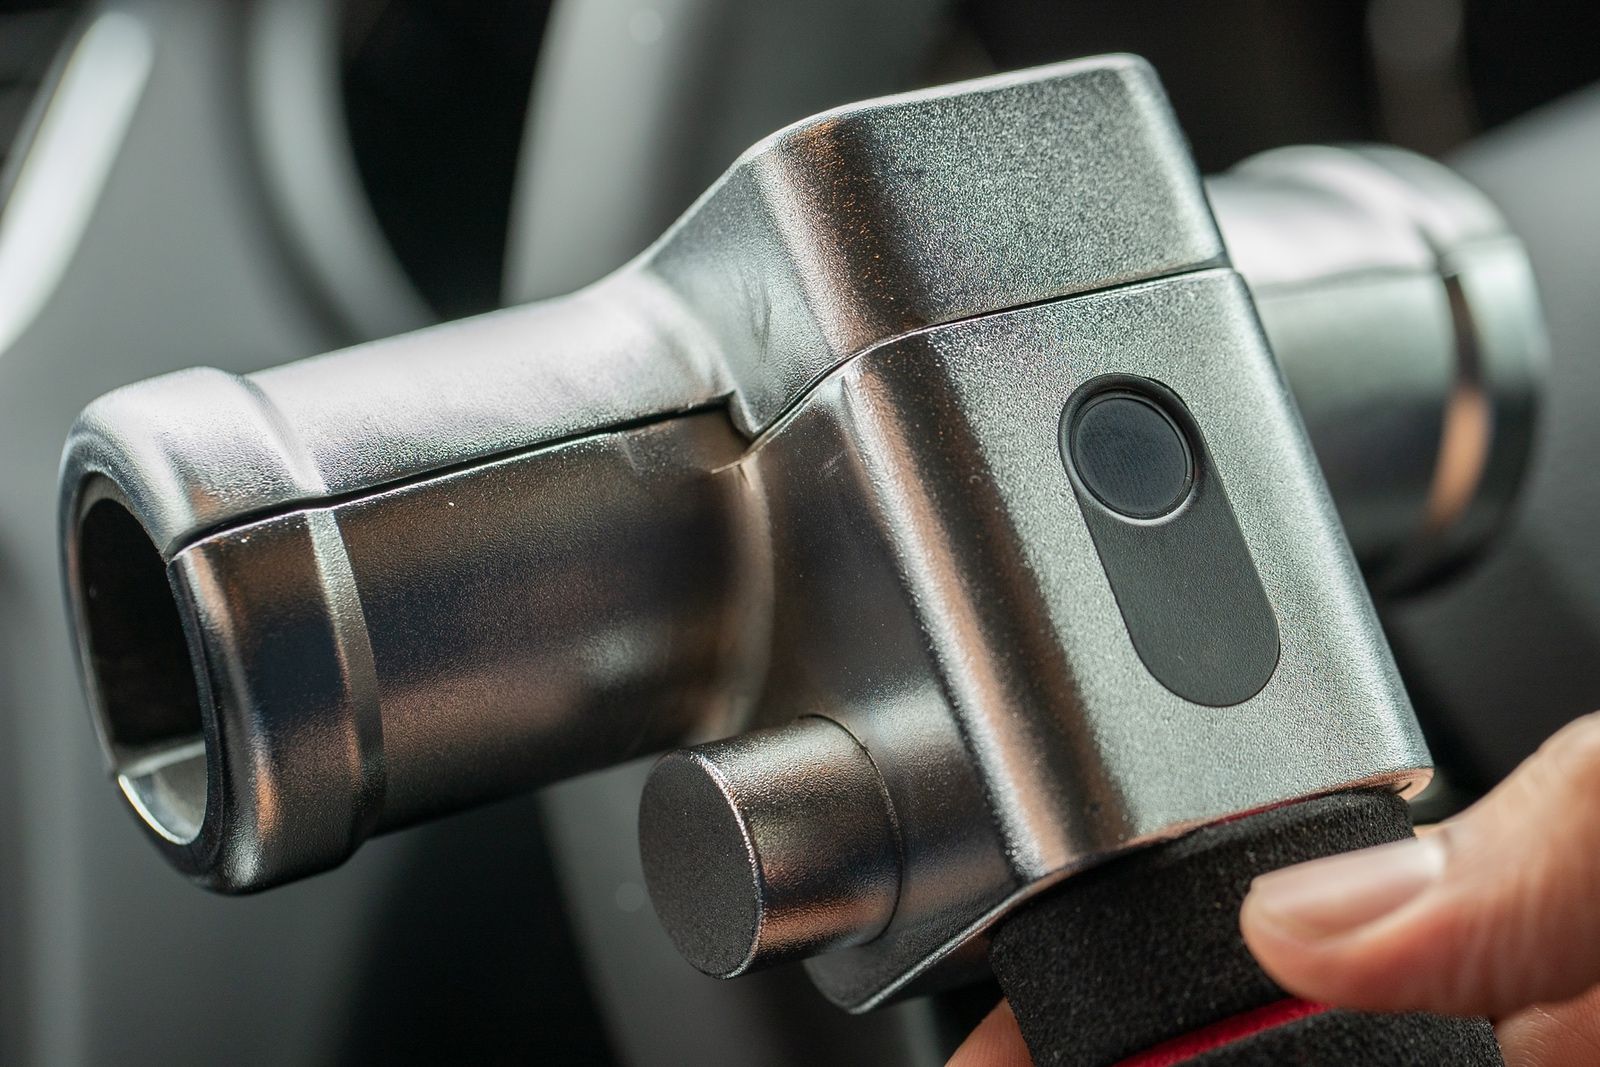 Halfords Has Put A Fingerprint Reader On A Steering Wheel Lock For The First Time image 1